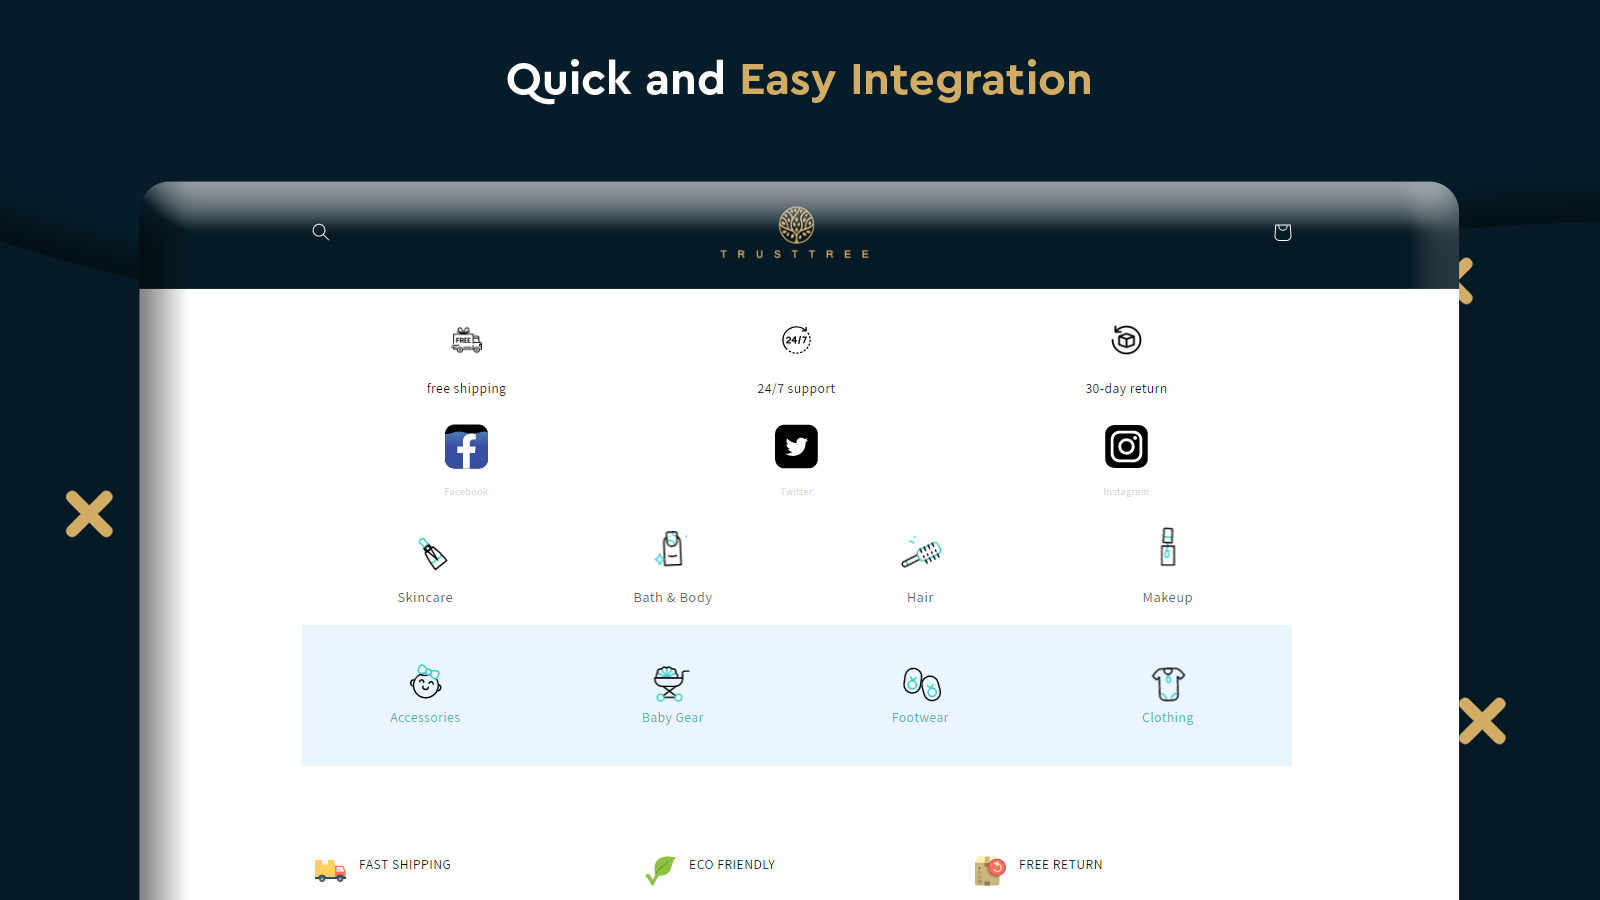  Trust Quick and Easy Integration